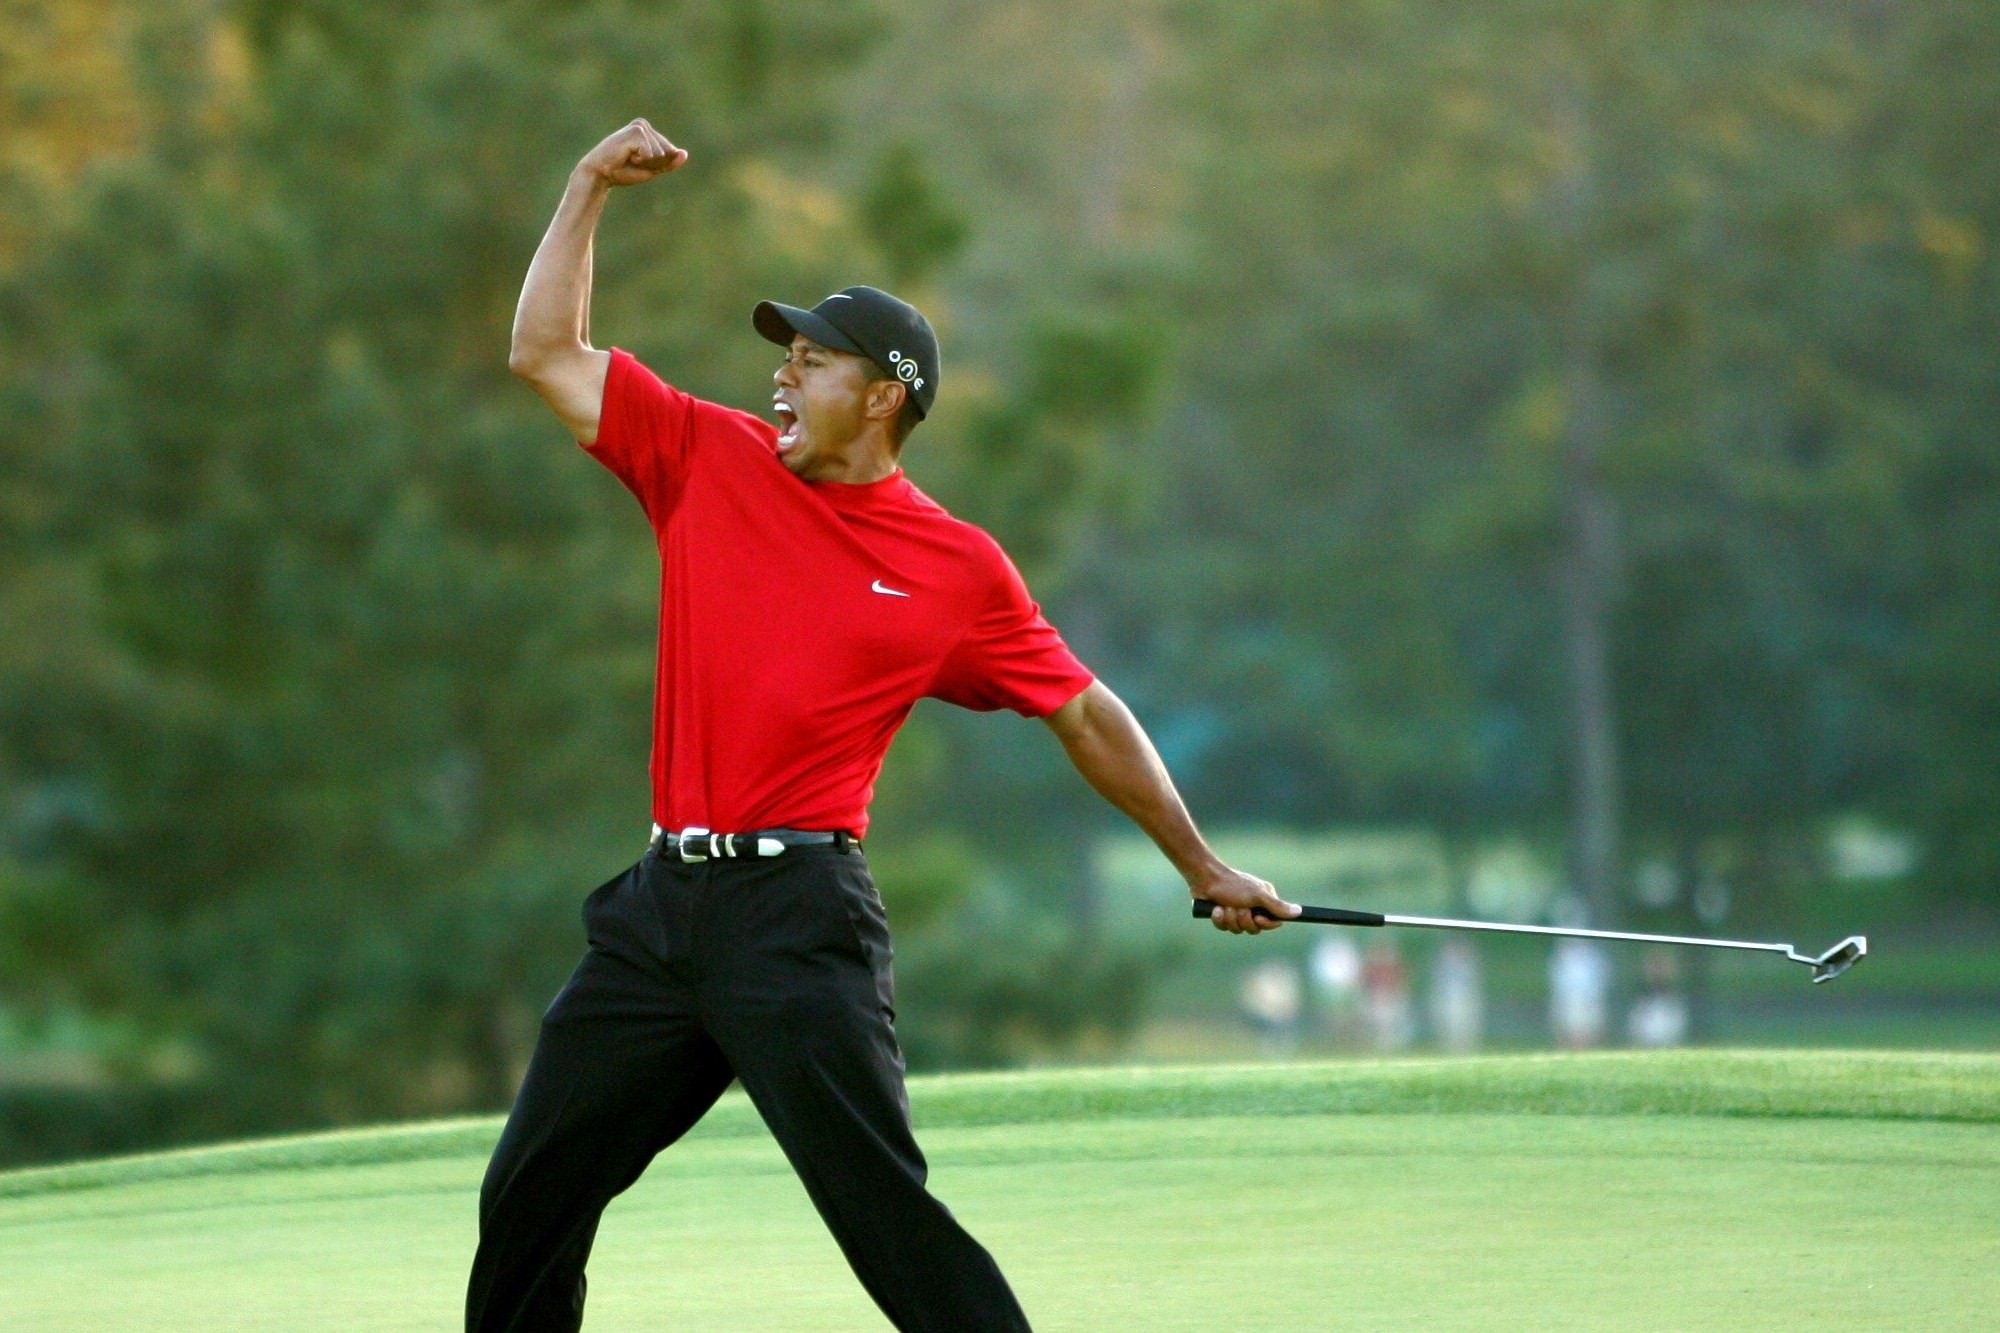 Tiger Woods schedule and results: When will the GOAT play next?